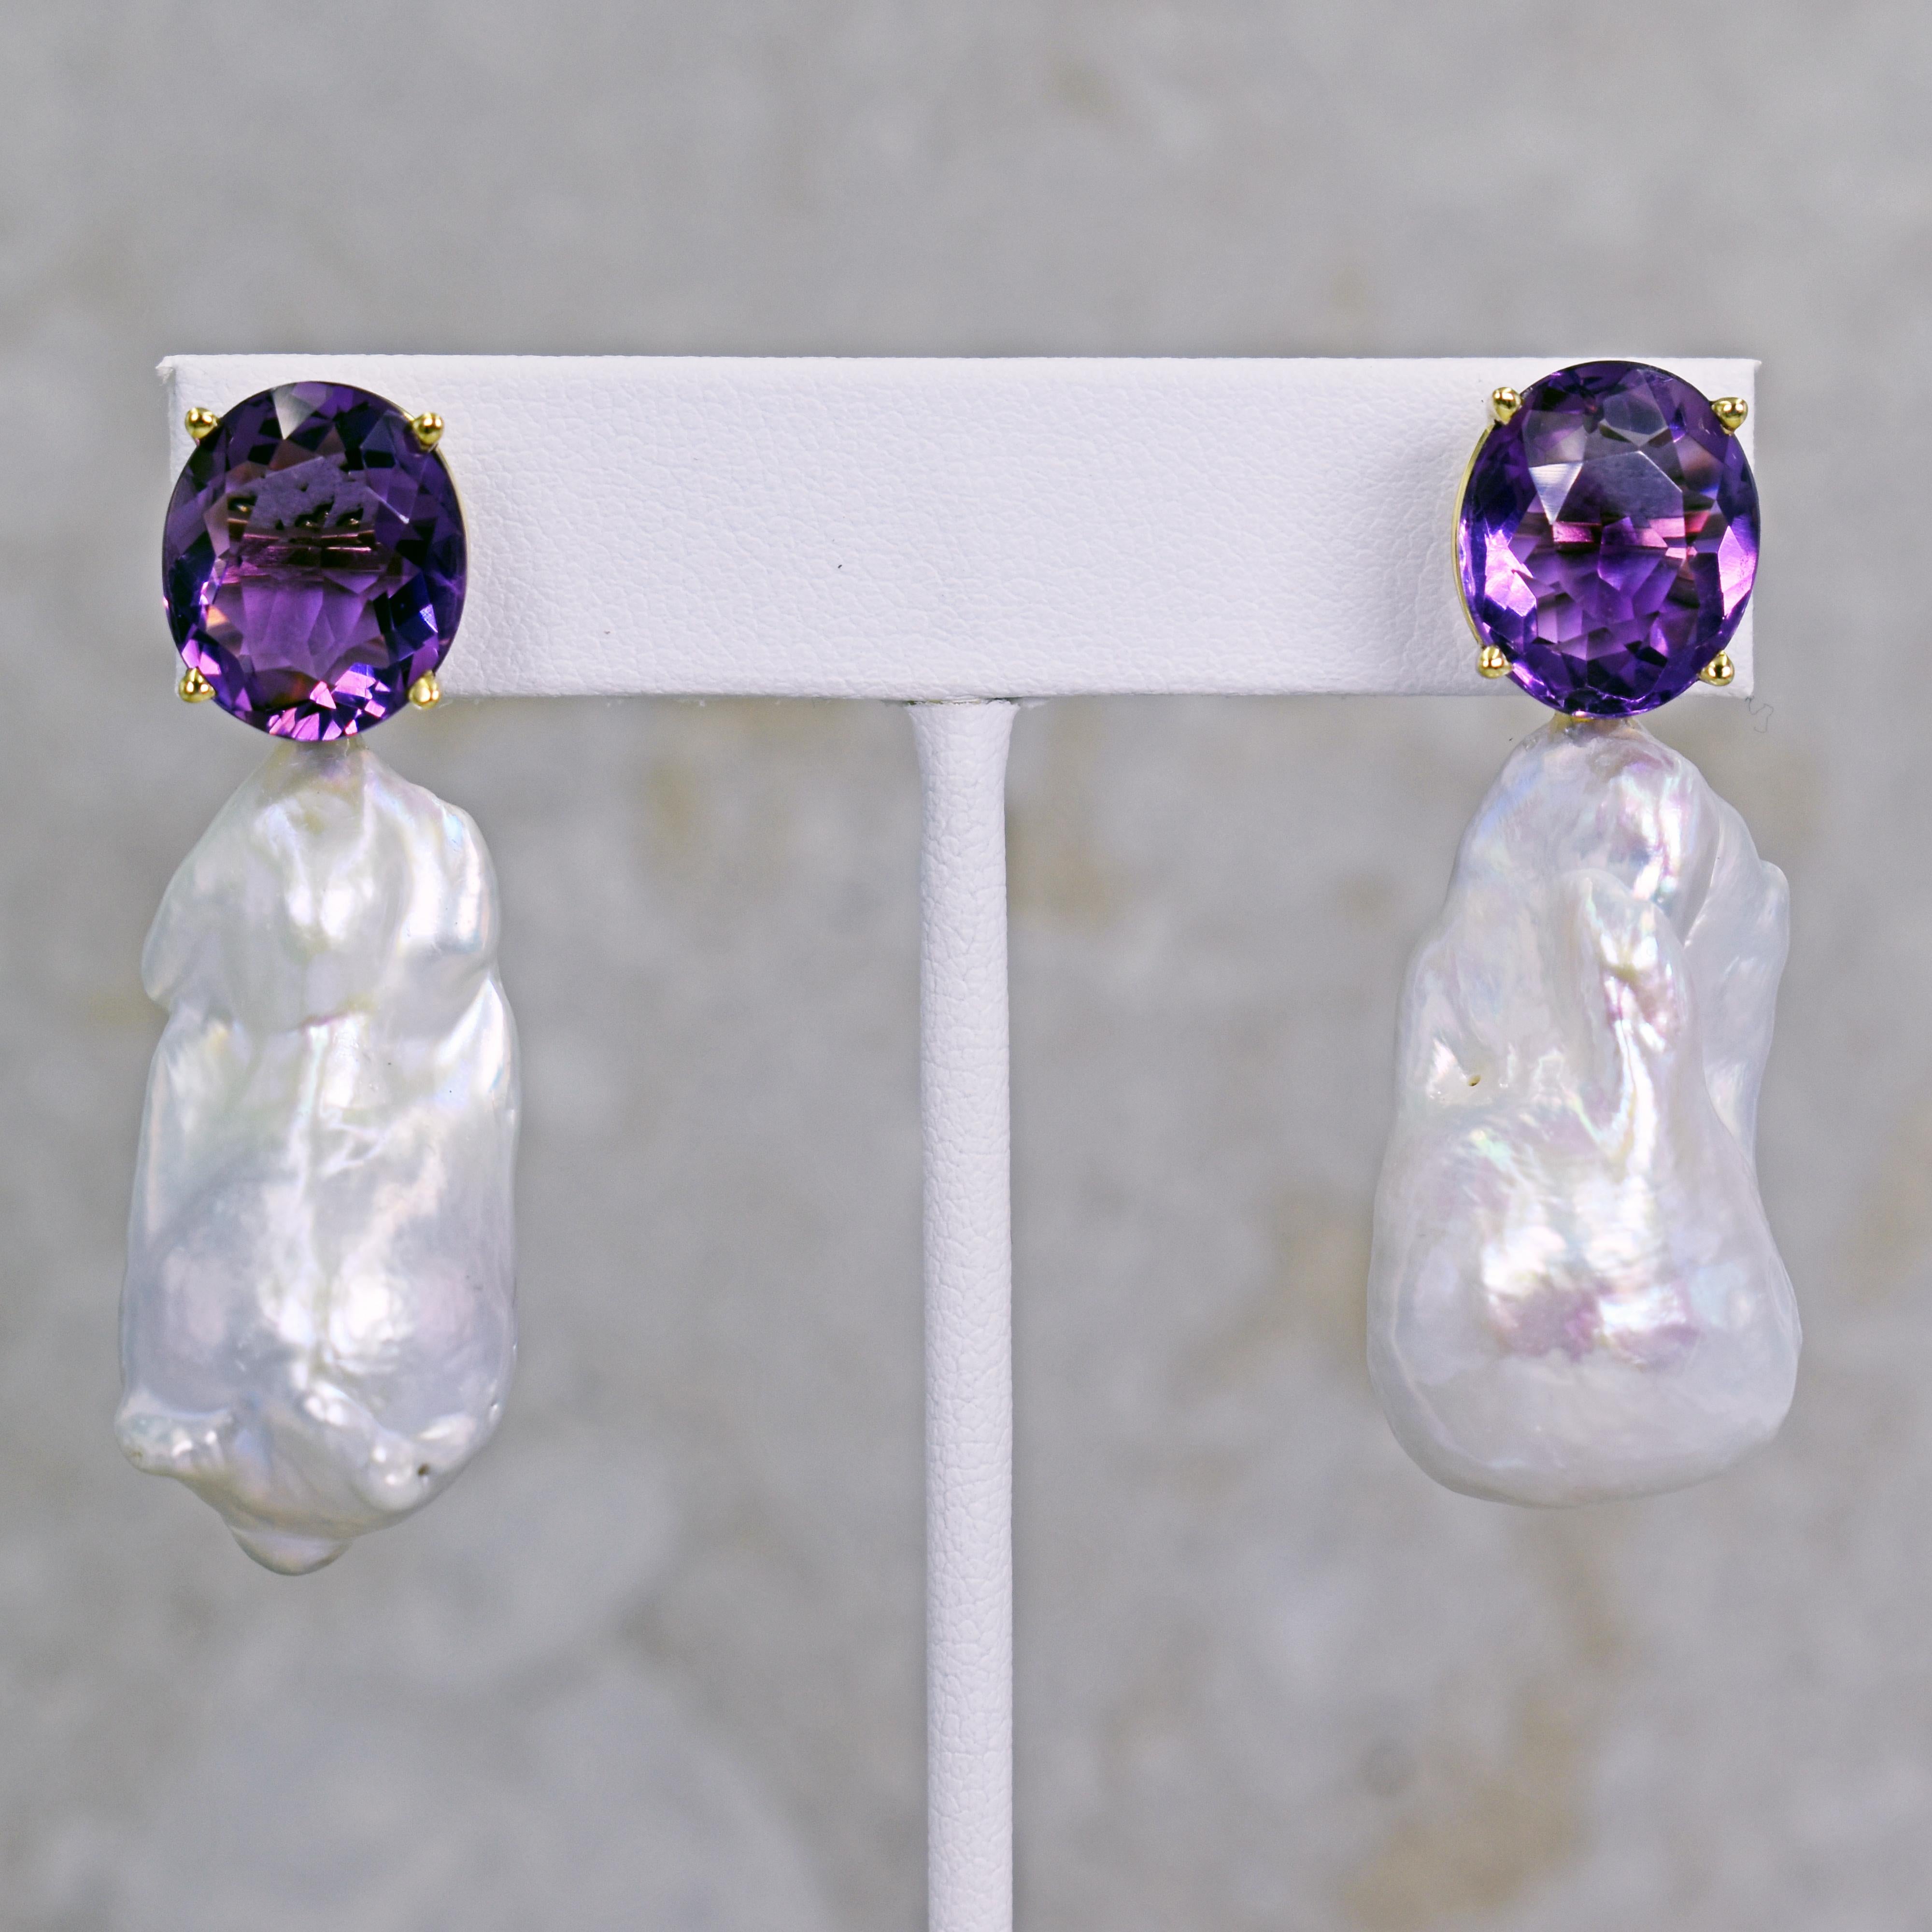 Gorgeous and unique 14k yellow gold stud earrings featuring two oval-cut Amethyst gemstones, totaling 12.46 carats, with large Freshwater Baroque Pearls. Stud earrings are 1.94 inches or 49 mm in length. These artisan statement drop earrings have